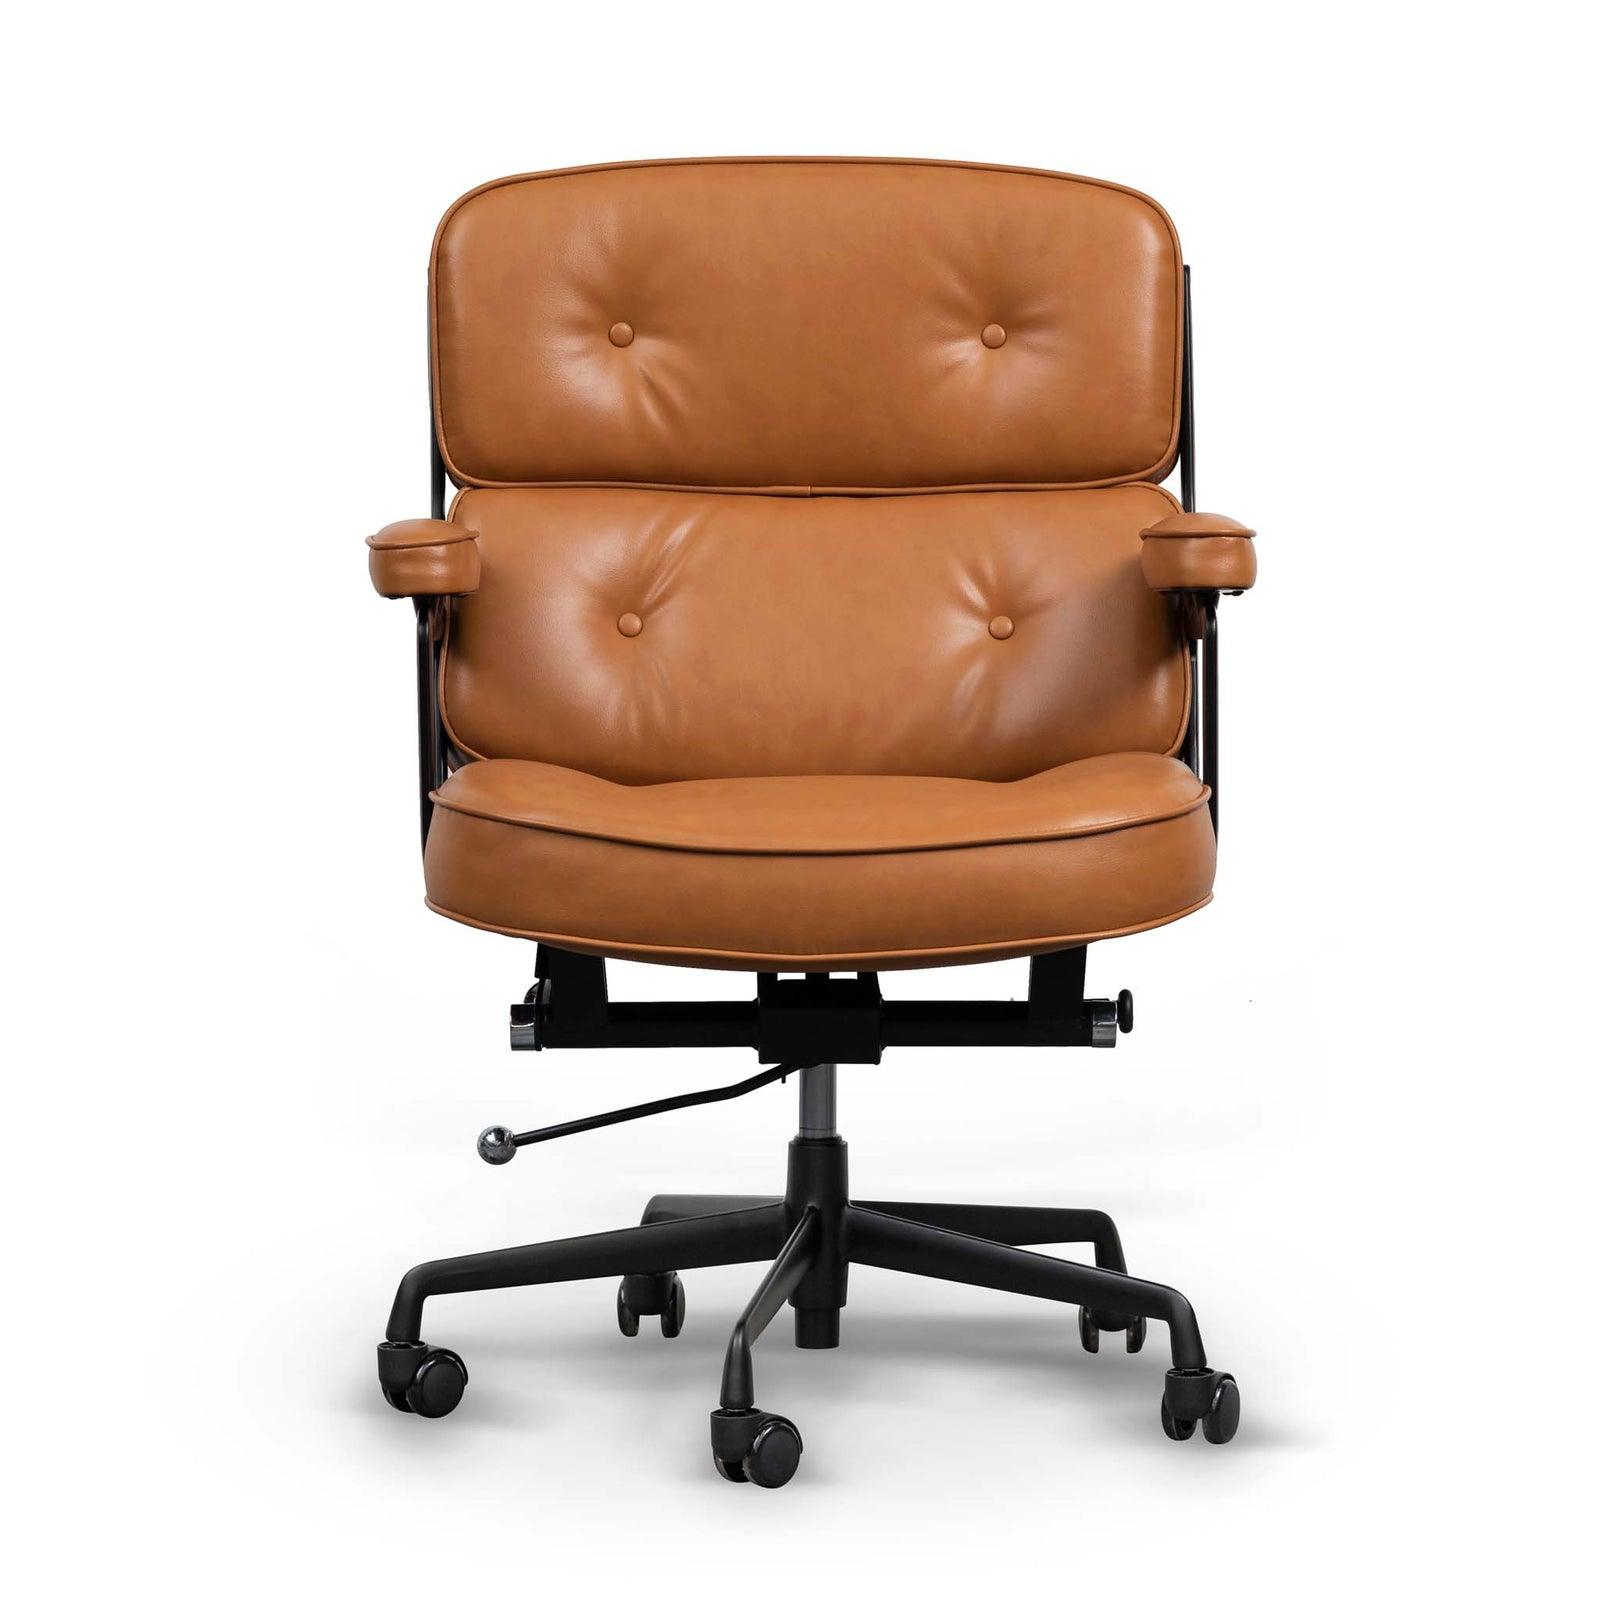 Office Chair - Honey Tan - Office/Gaming ChairsOC8206-YS 2